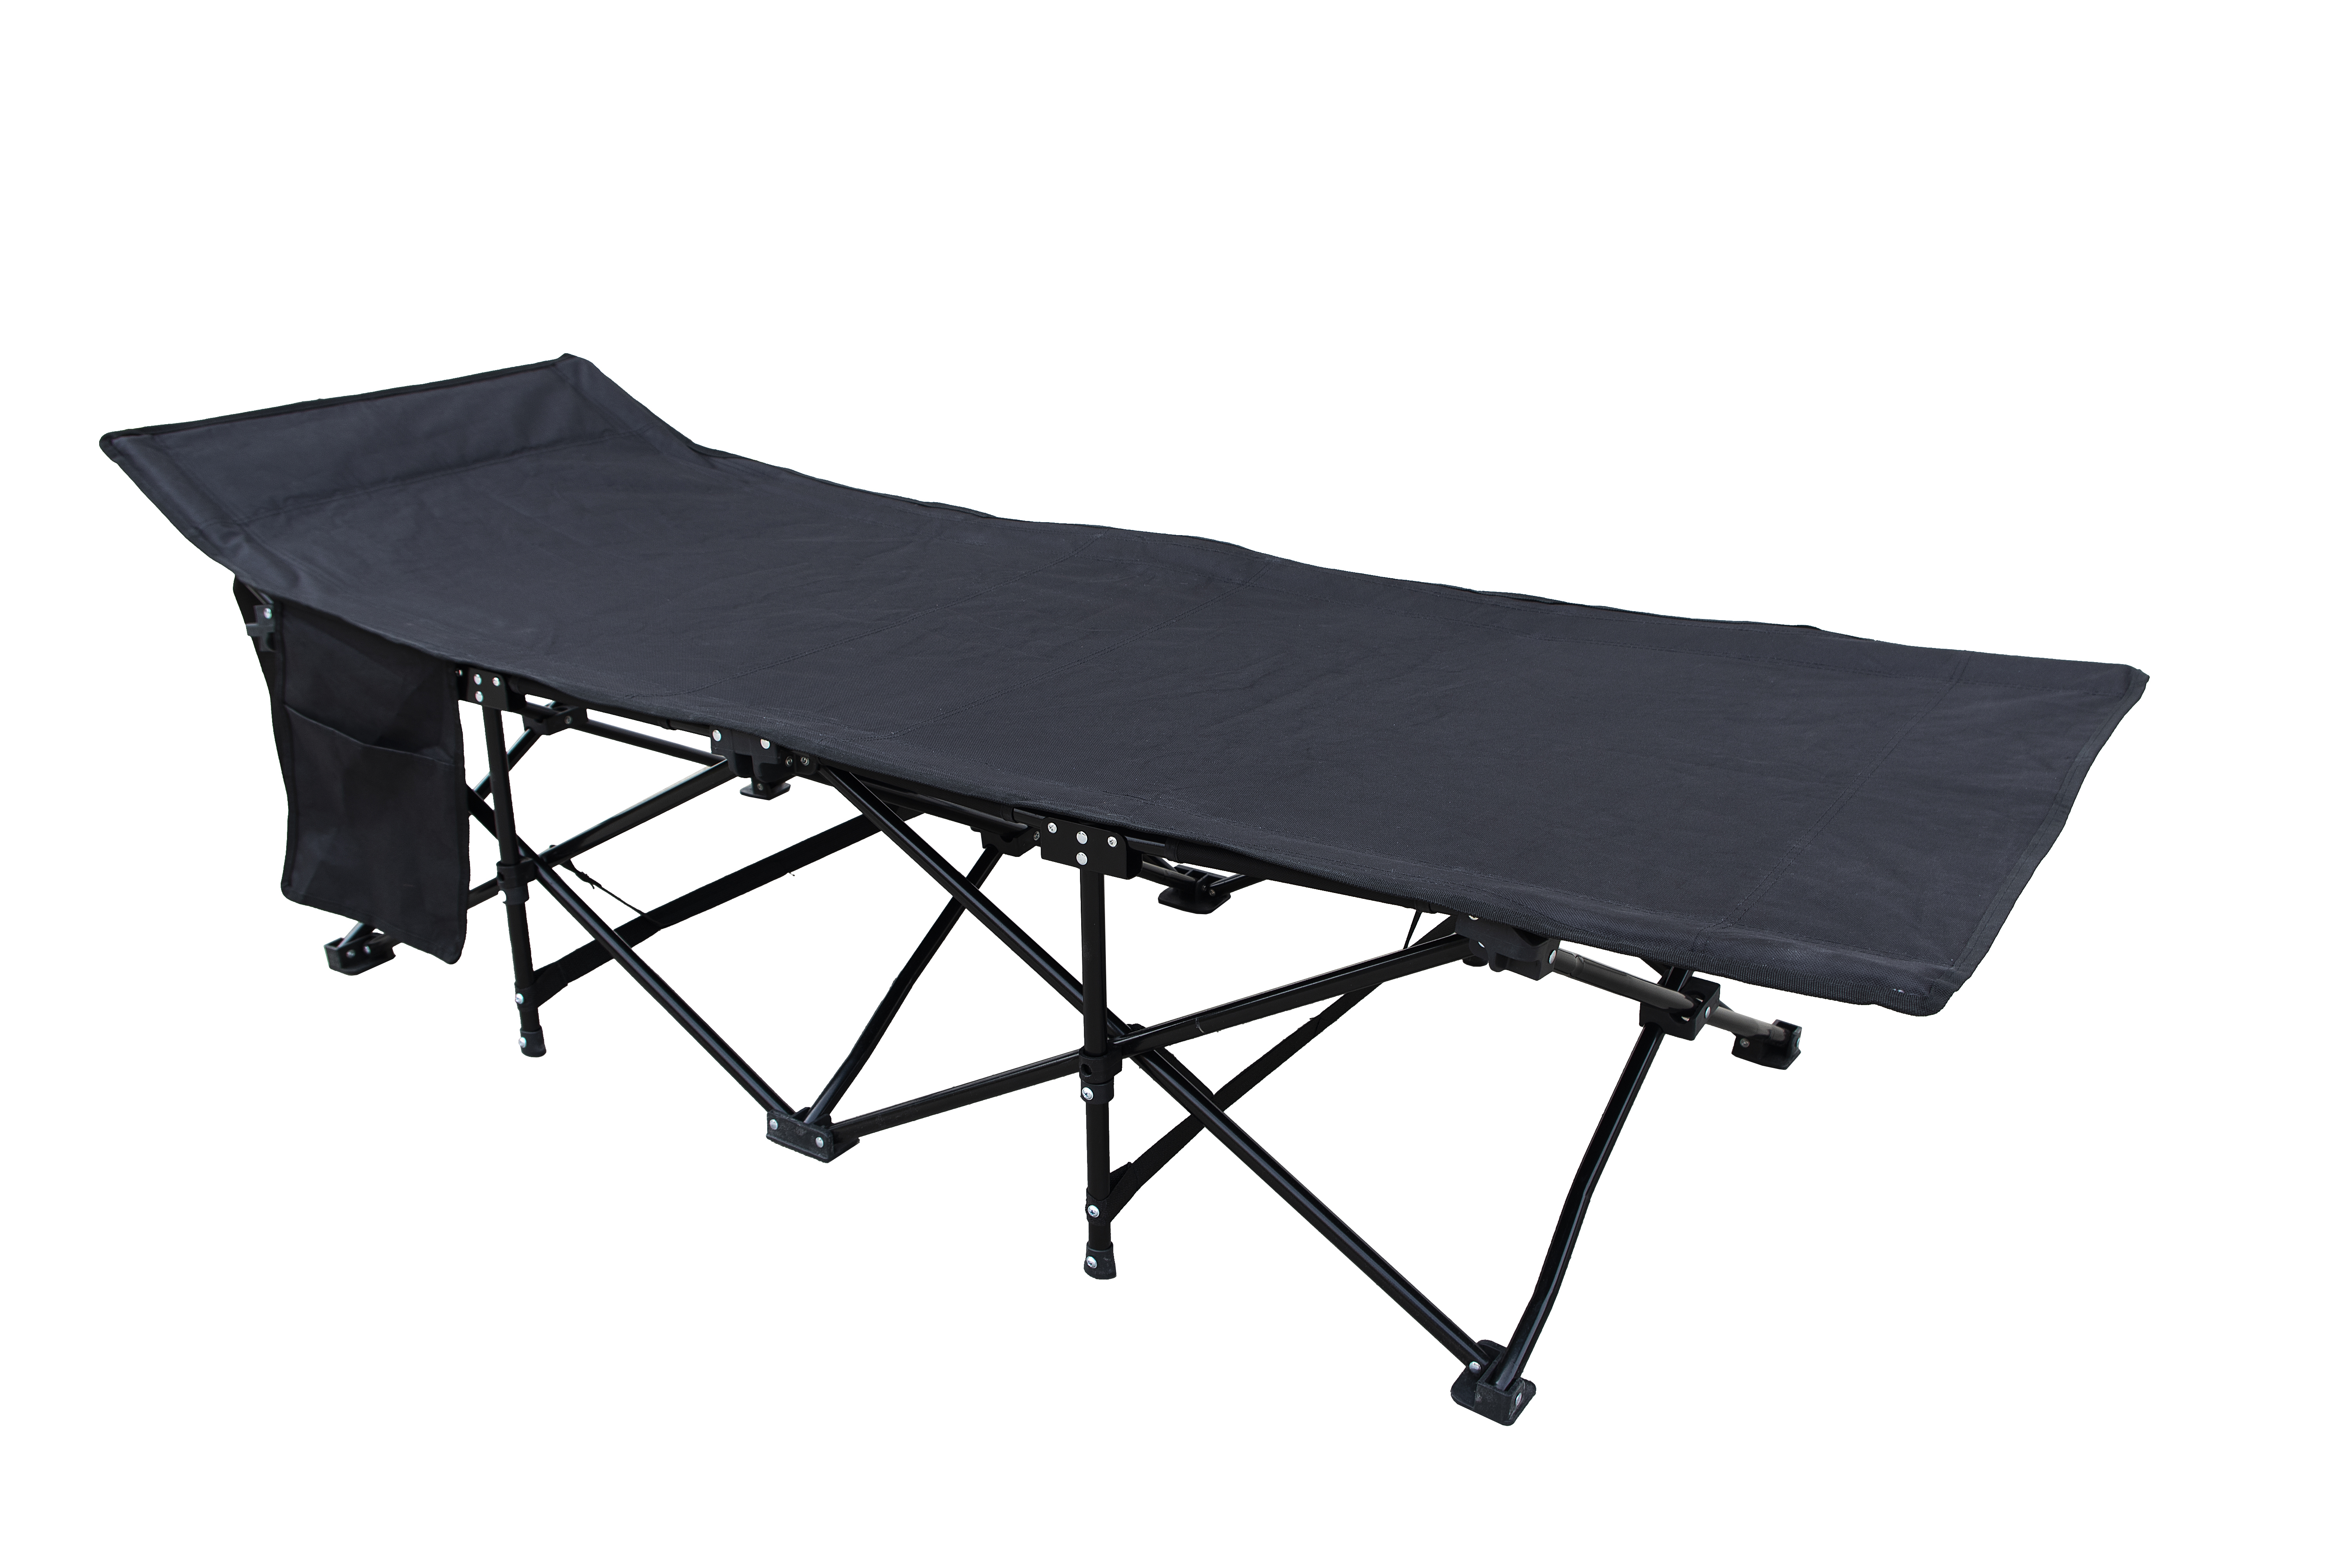 Origin Outdoors "Travelchair Campbed"